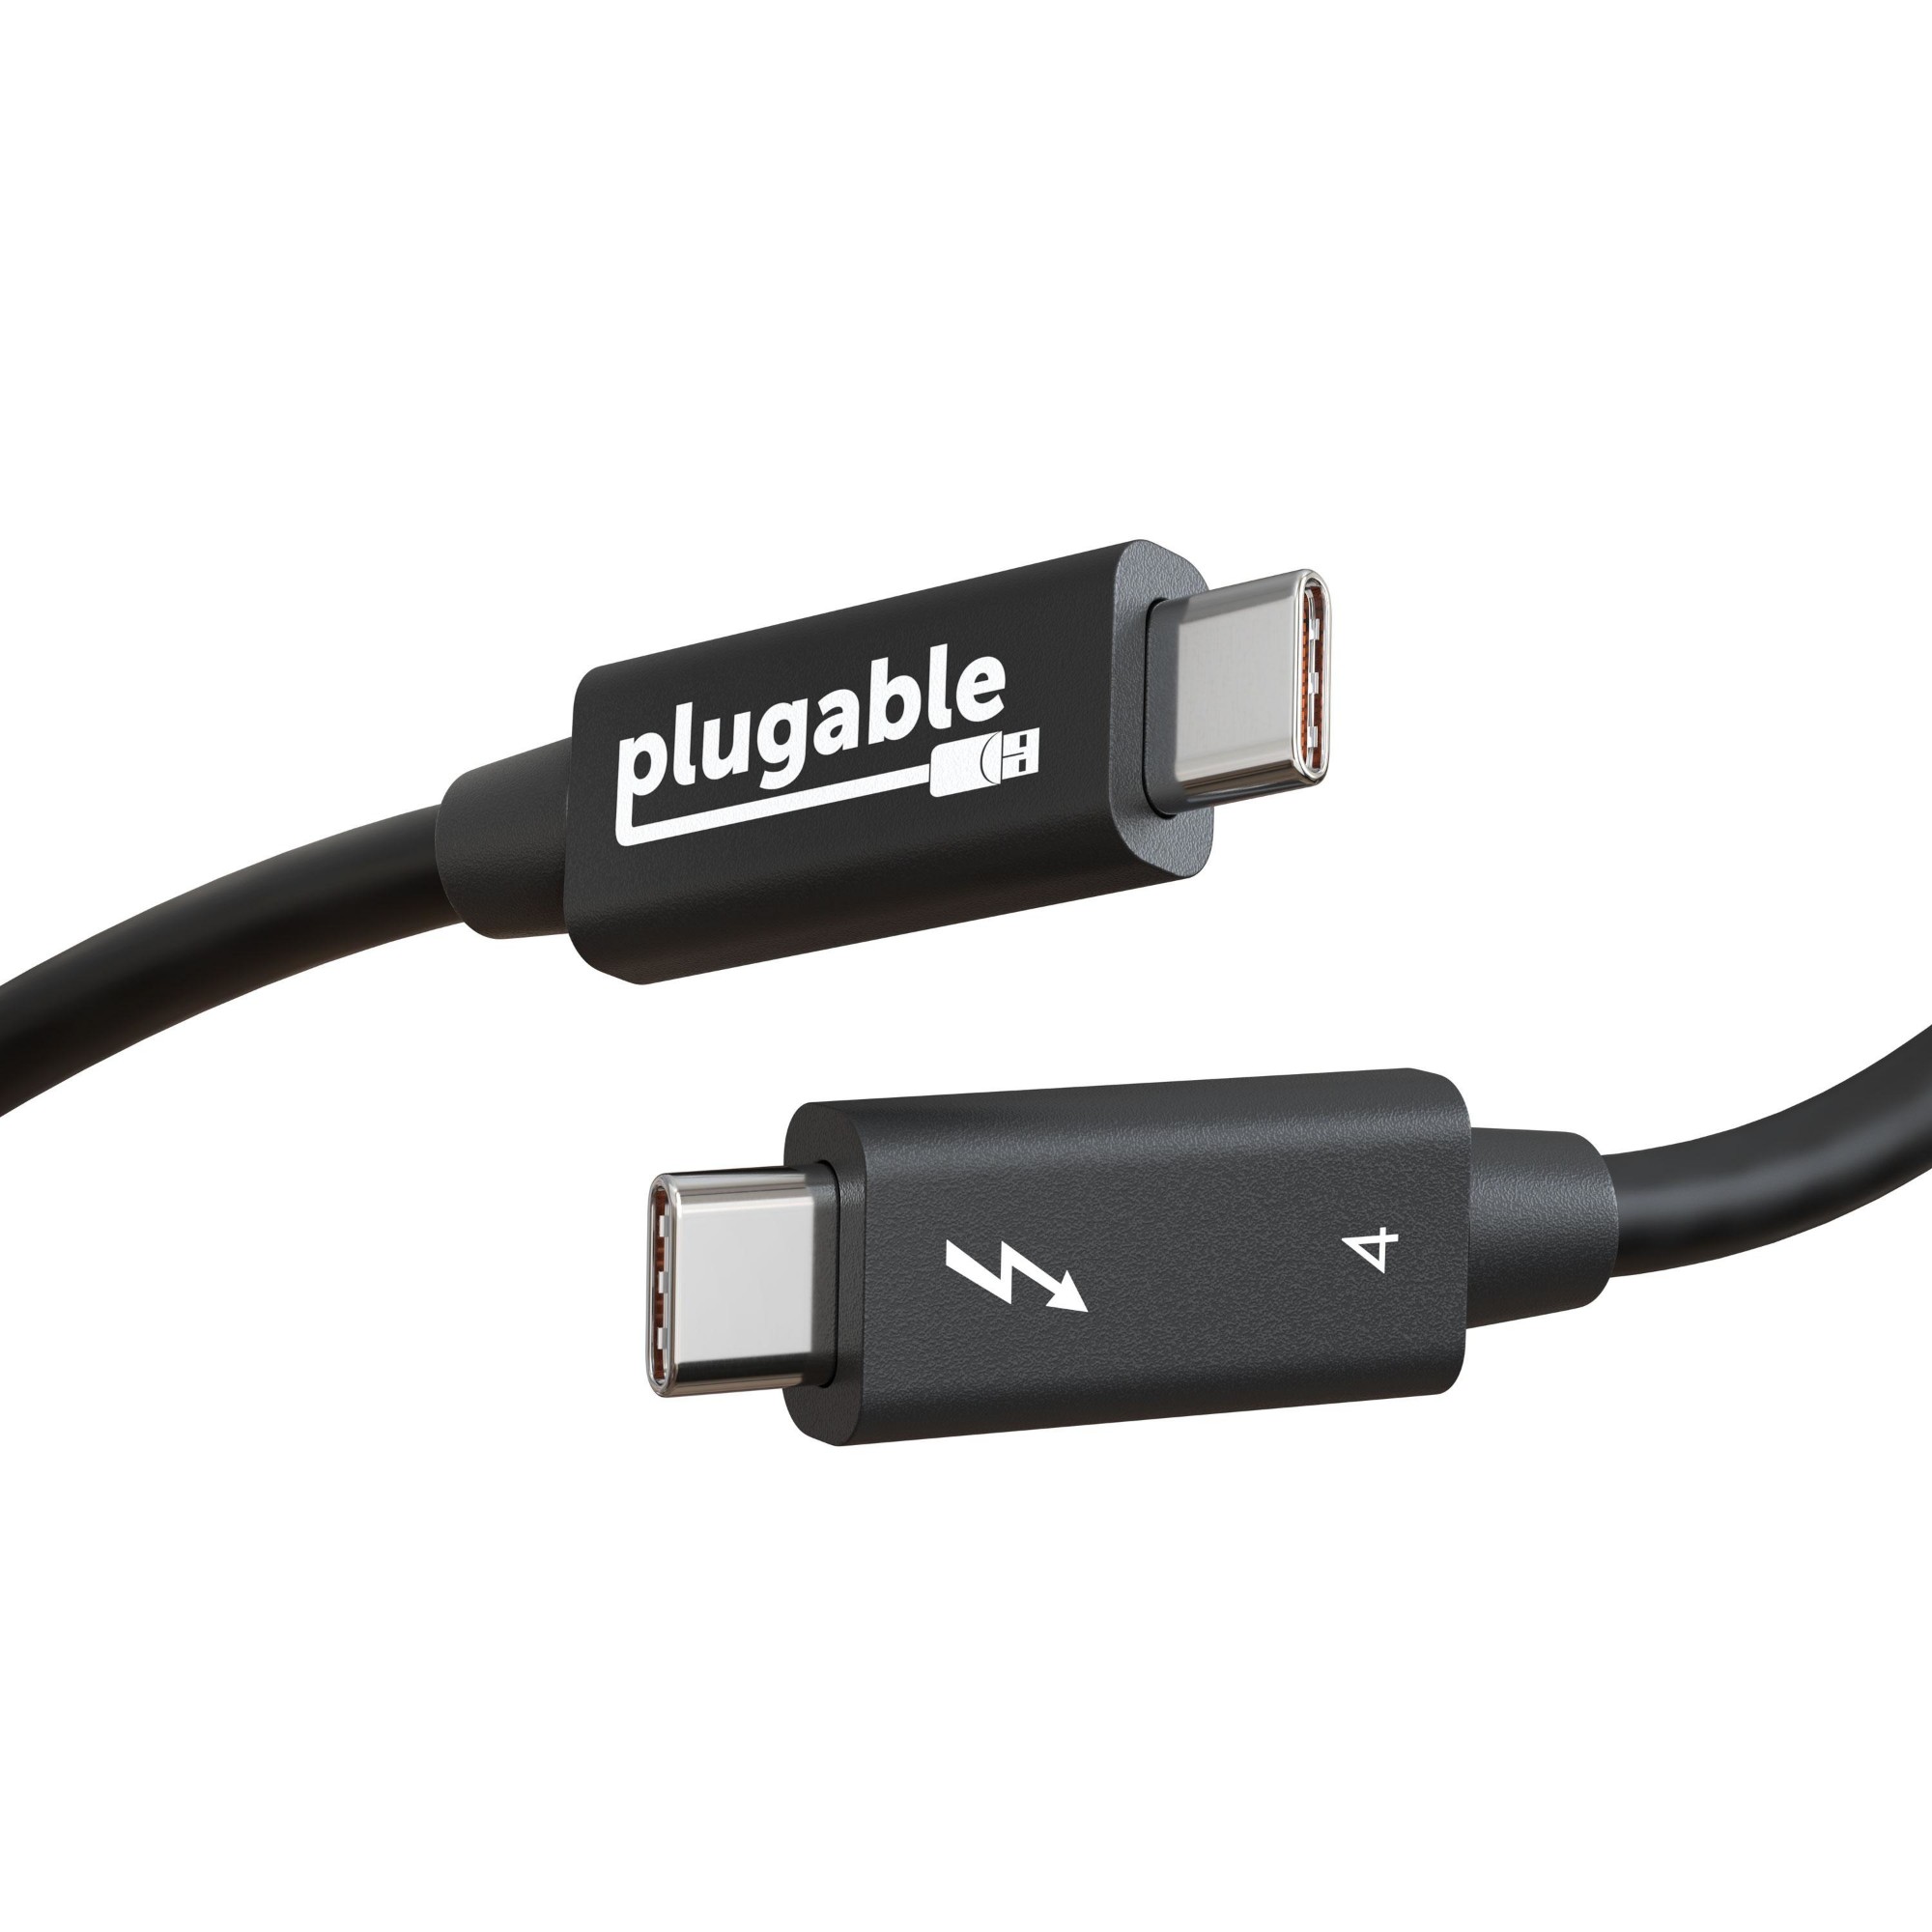 TBT4-40G2M PLUGABLE TECHNOLOGIES PLUGABLE THUNDERBOLT 4 CABLE  THUNDERBOLT CERTIFIED  2M/6.6FT, 100W CHARGING, SI